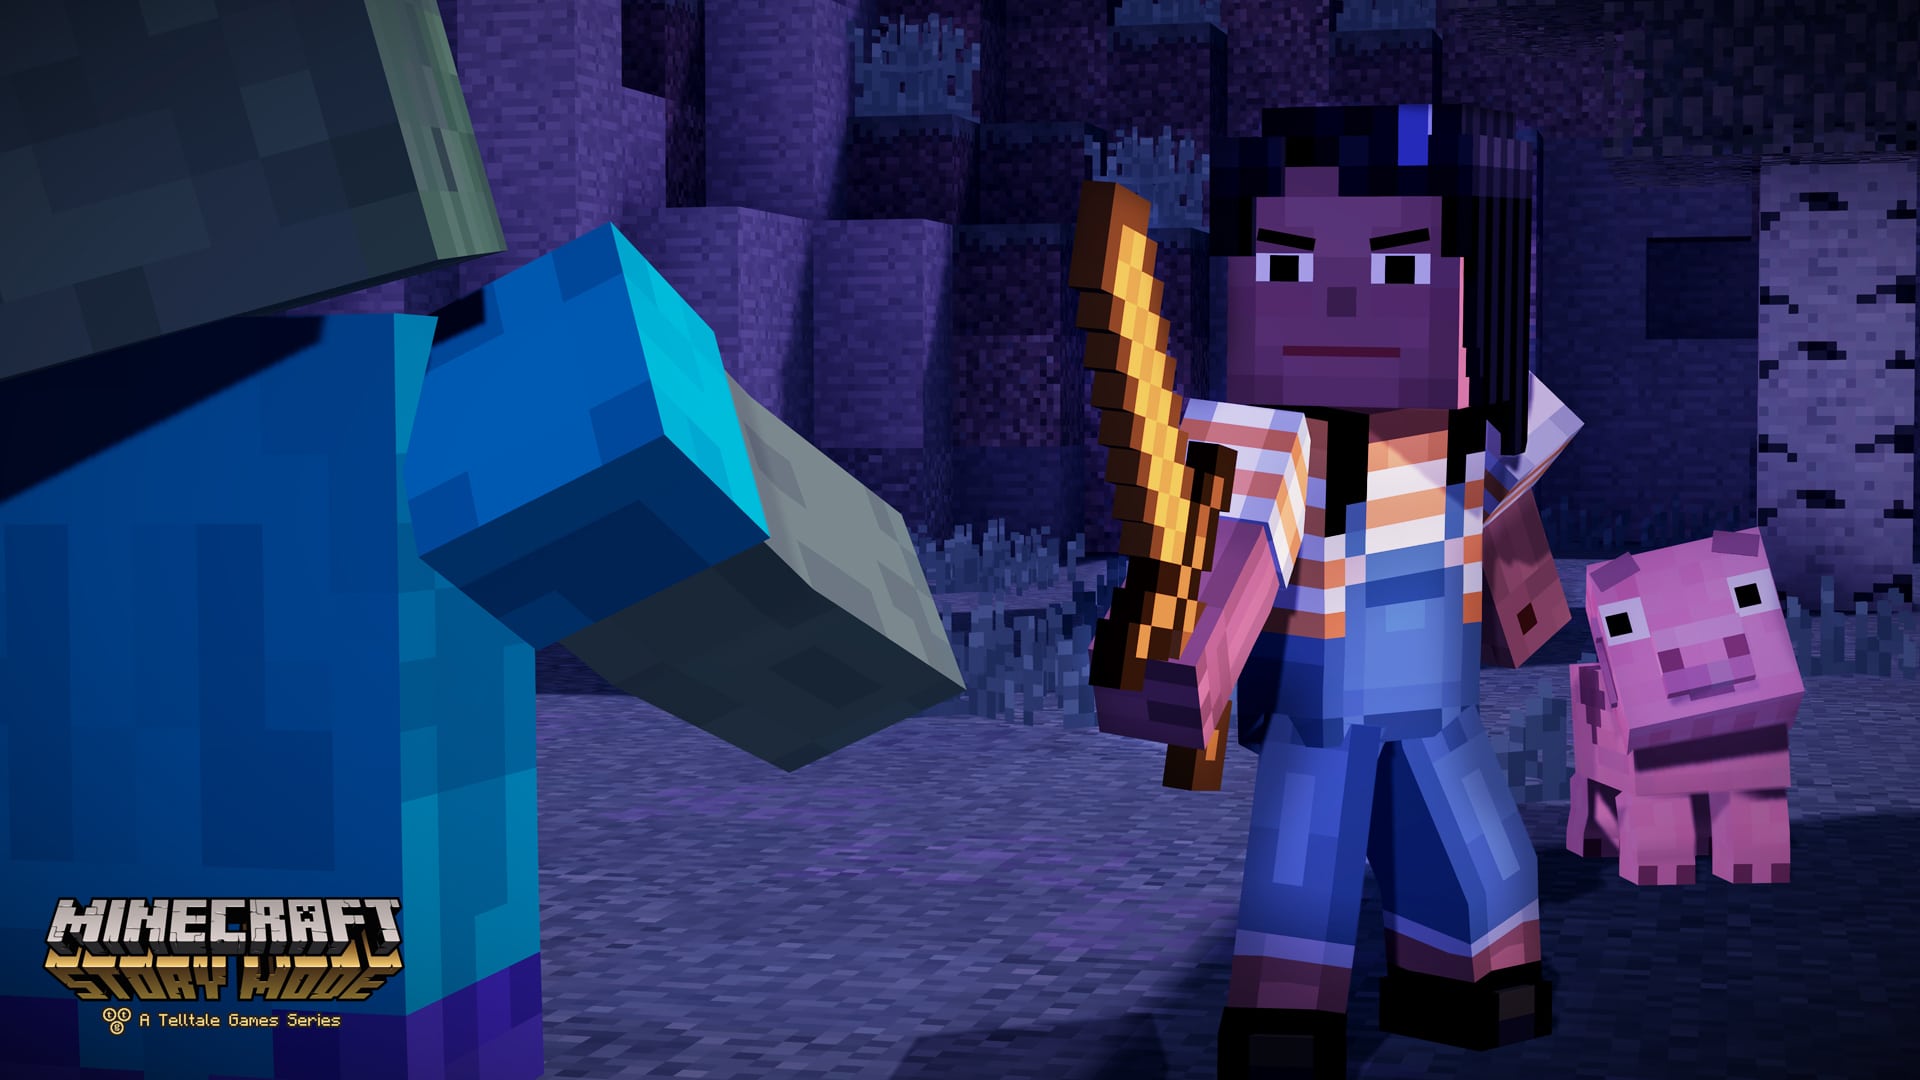 Motionographer® Telltale's “Minecraft: Story Mode:” Changing the Game?